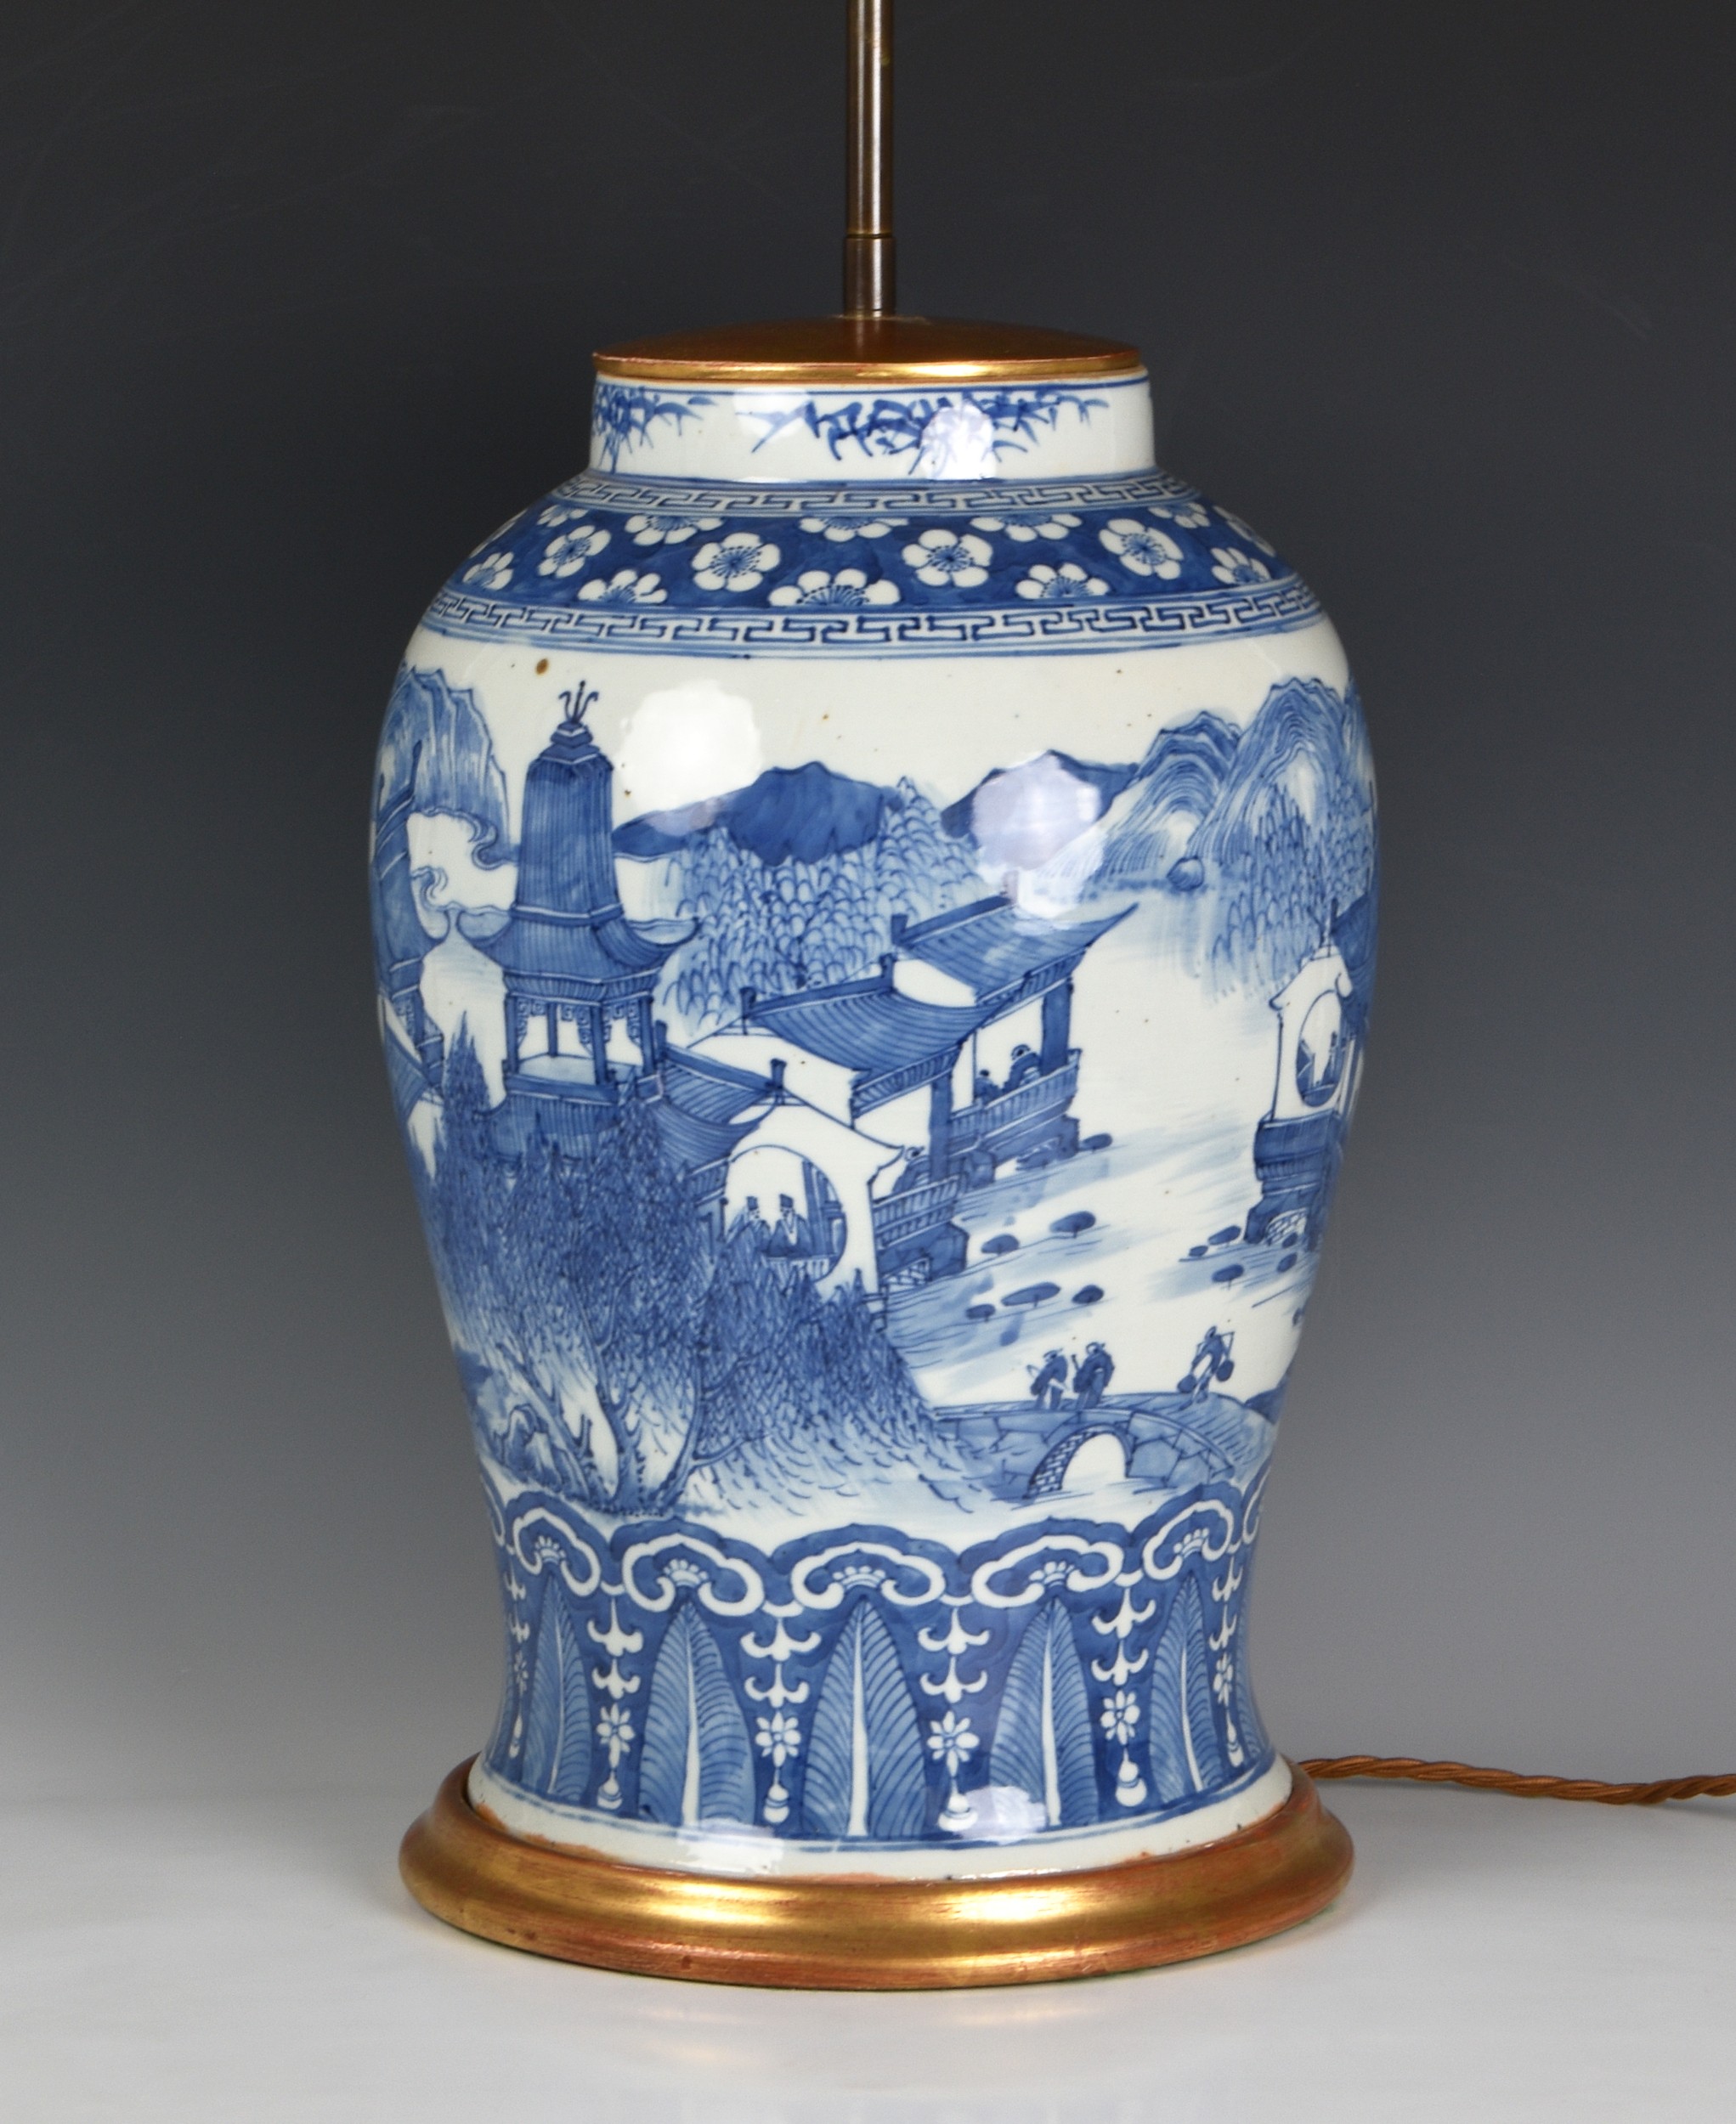 A large Chinese blue and white vase lamp, the vase probably 19th century, of stout baluster form,